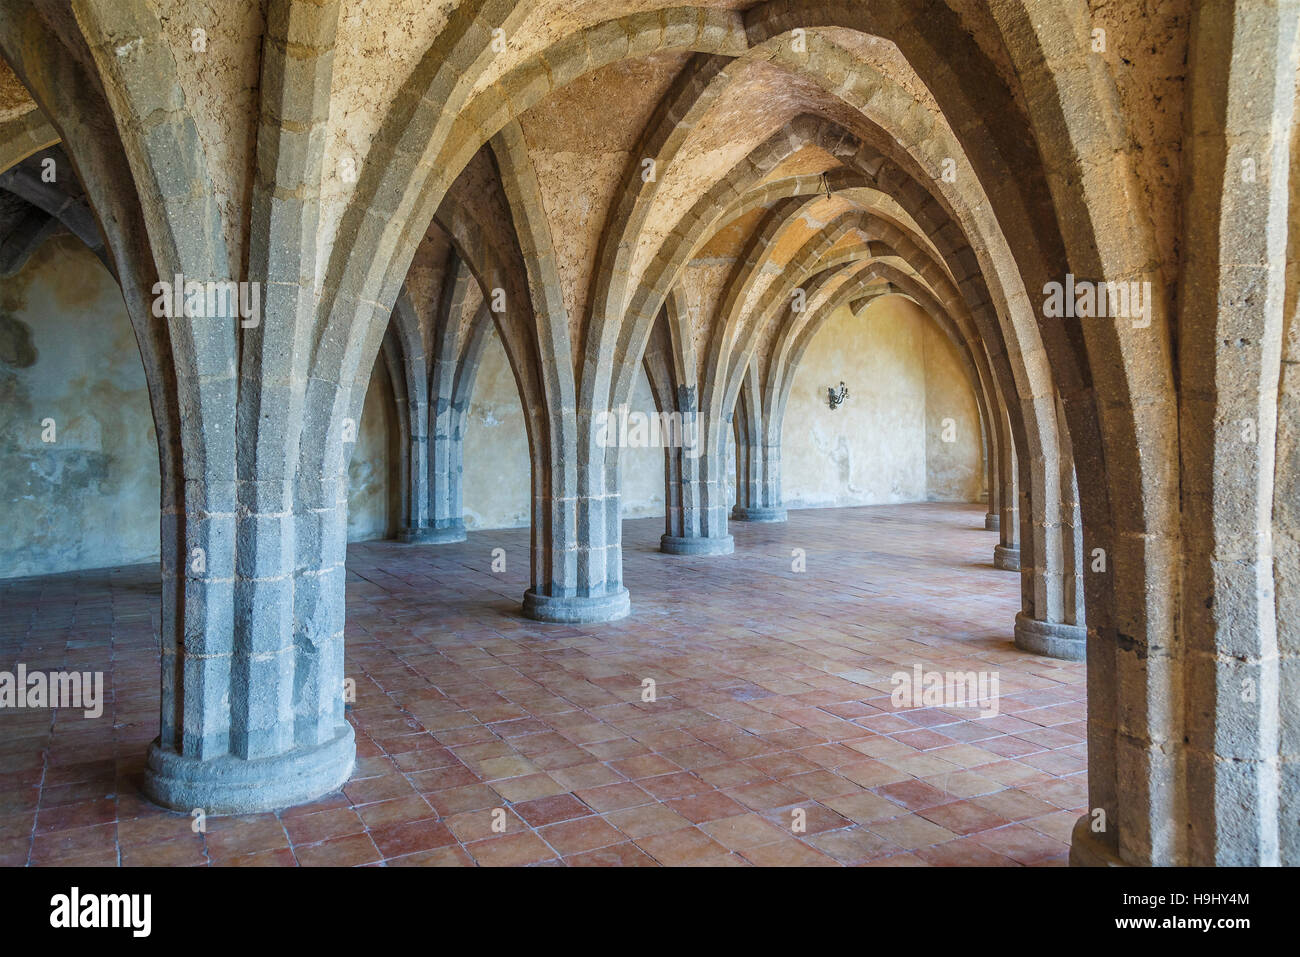 The vaulted crypt of the 11th century Villa Cimbrone in Ravello, Southern Italy. Stock Photo